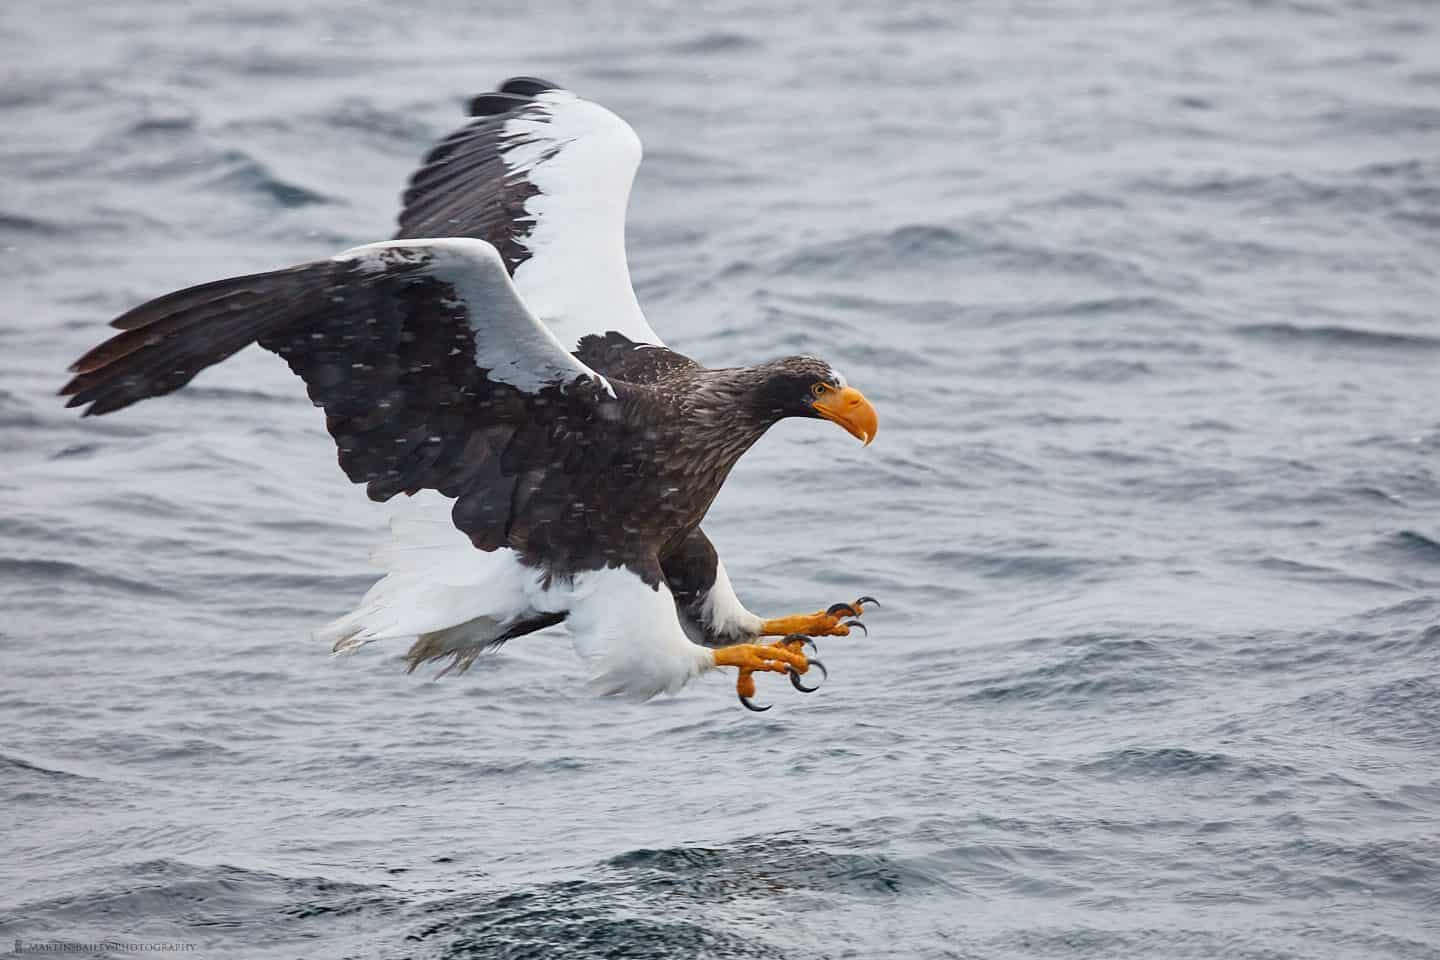 Steller's Sea Eagle with Talons Out